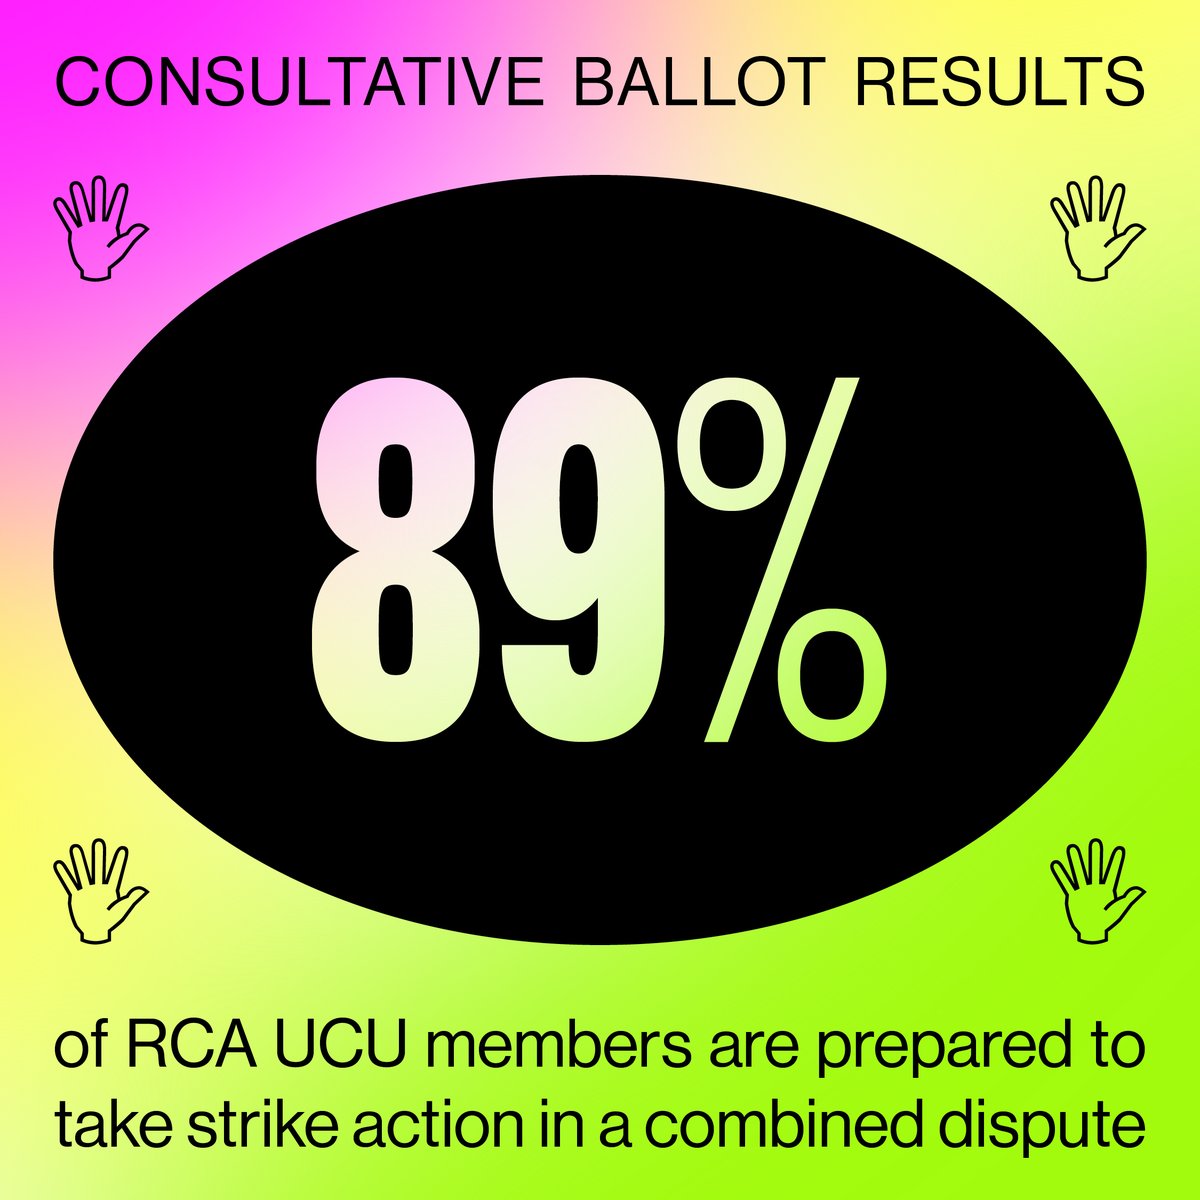 What a result on our consultative ballot! On a 74% turnout, 89% of members said they would strike because of the @RCA's plans to decrease job security, entrench casualisation & move to a rolling 12 month teaching model all of which will exacerbate systemic issues of inequality.